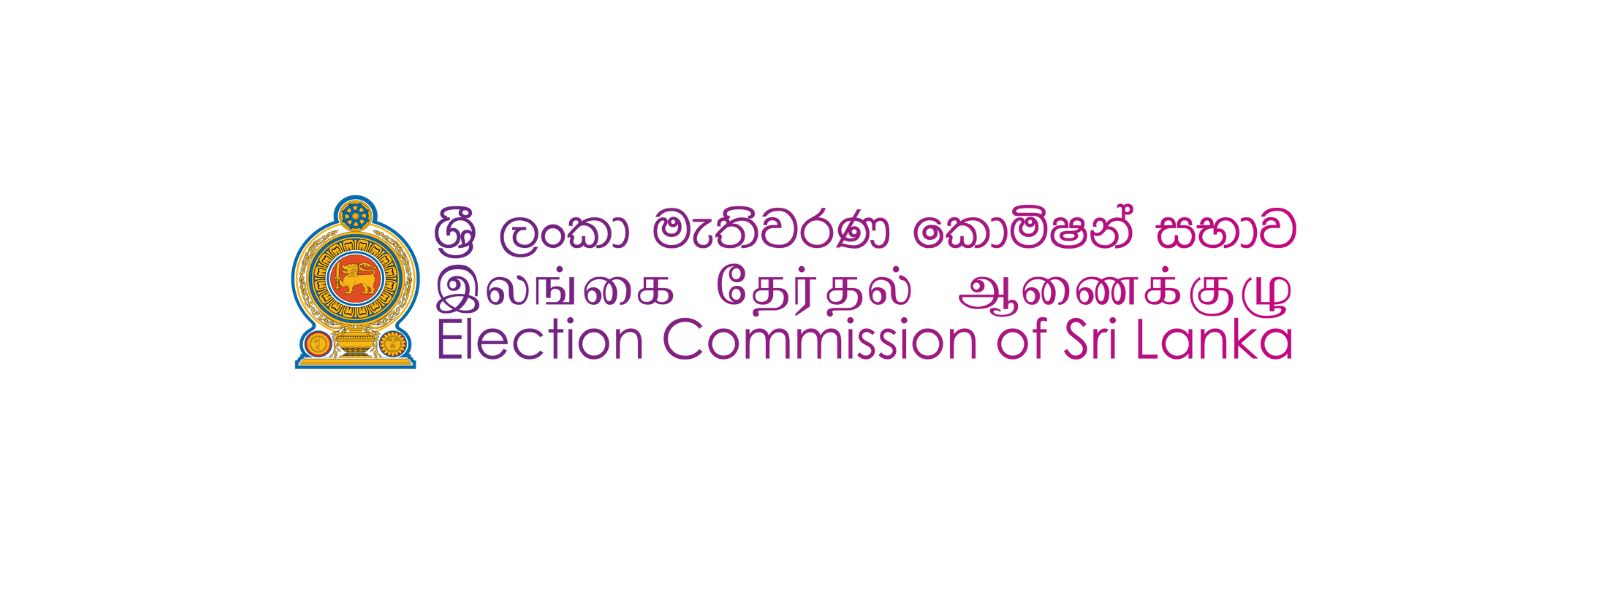 Discussion at the Election Commission today